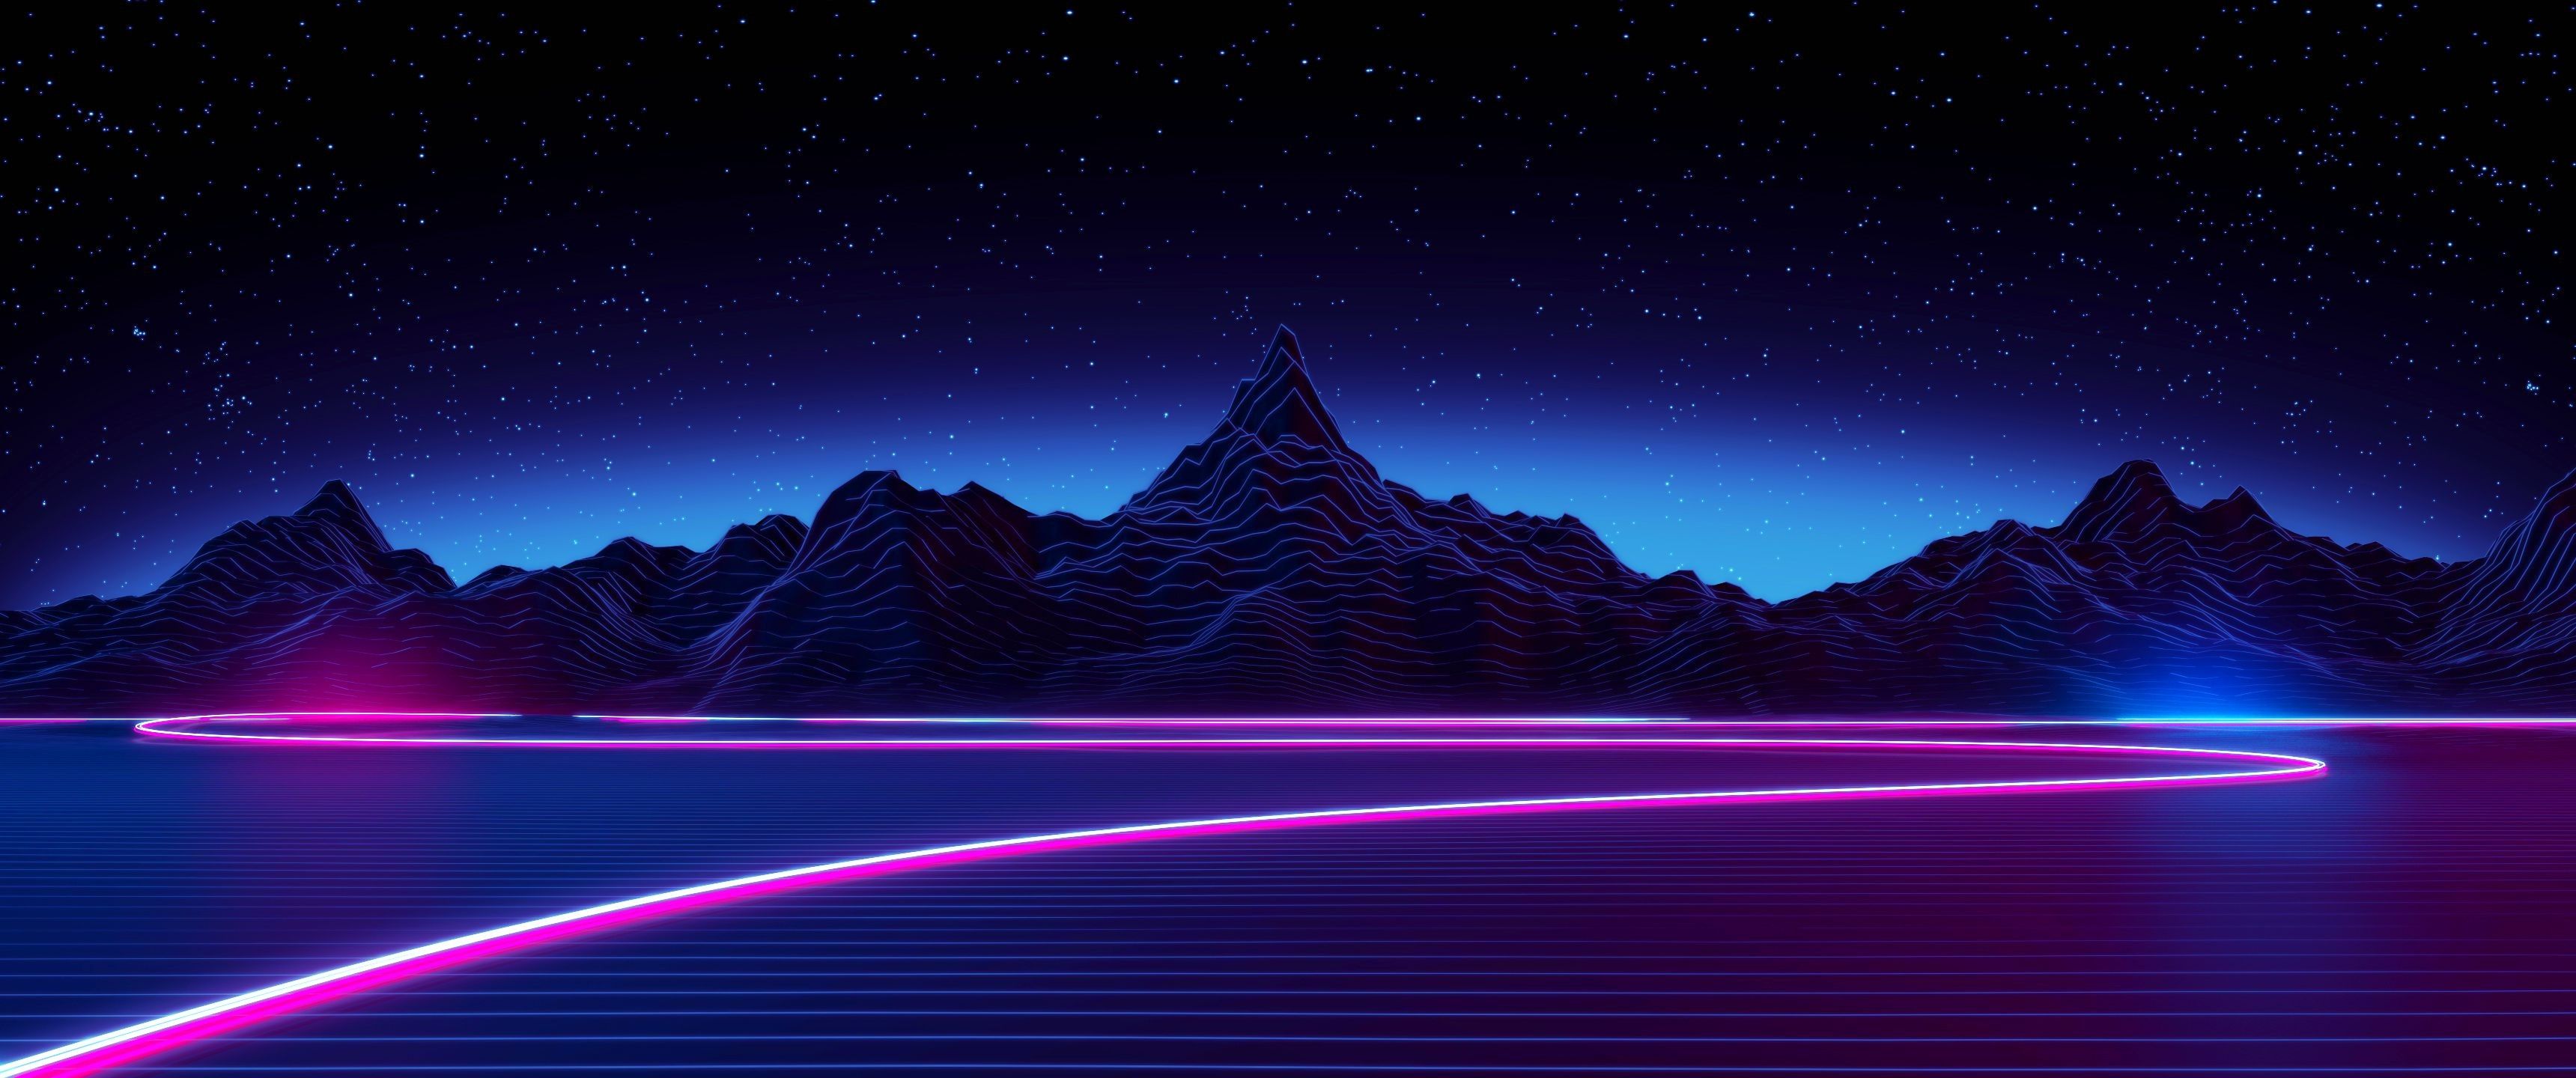 Wallpaper, night, neon, nature, sky, Earth, Retro style, synthwave, midnight, darkness, 3440x1440 px, computer wallpaper, atmosphere of earth, outer space, phenomenon 3440x1440